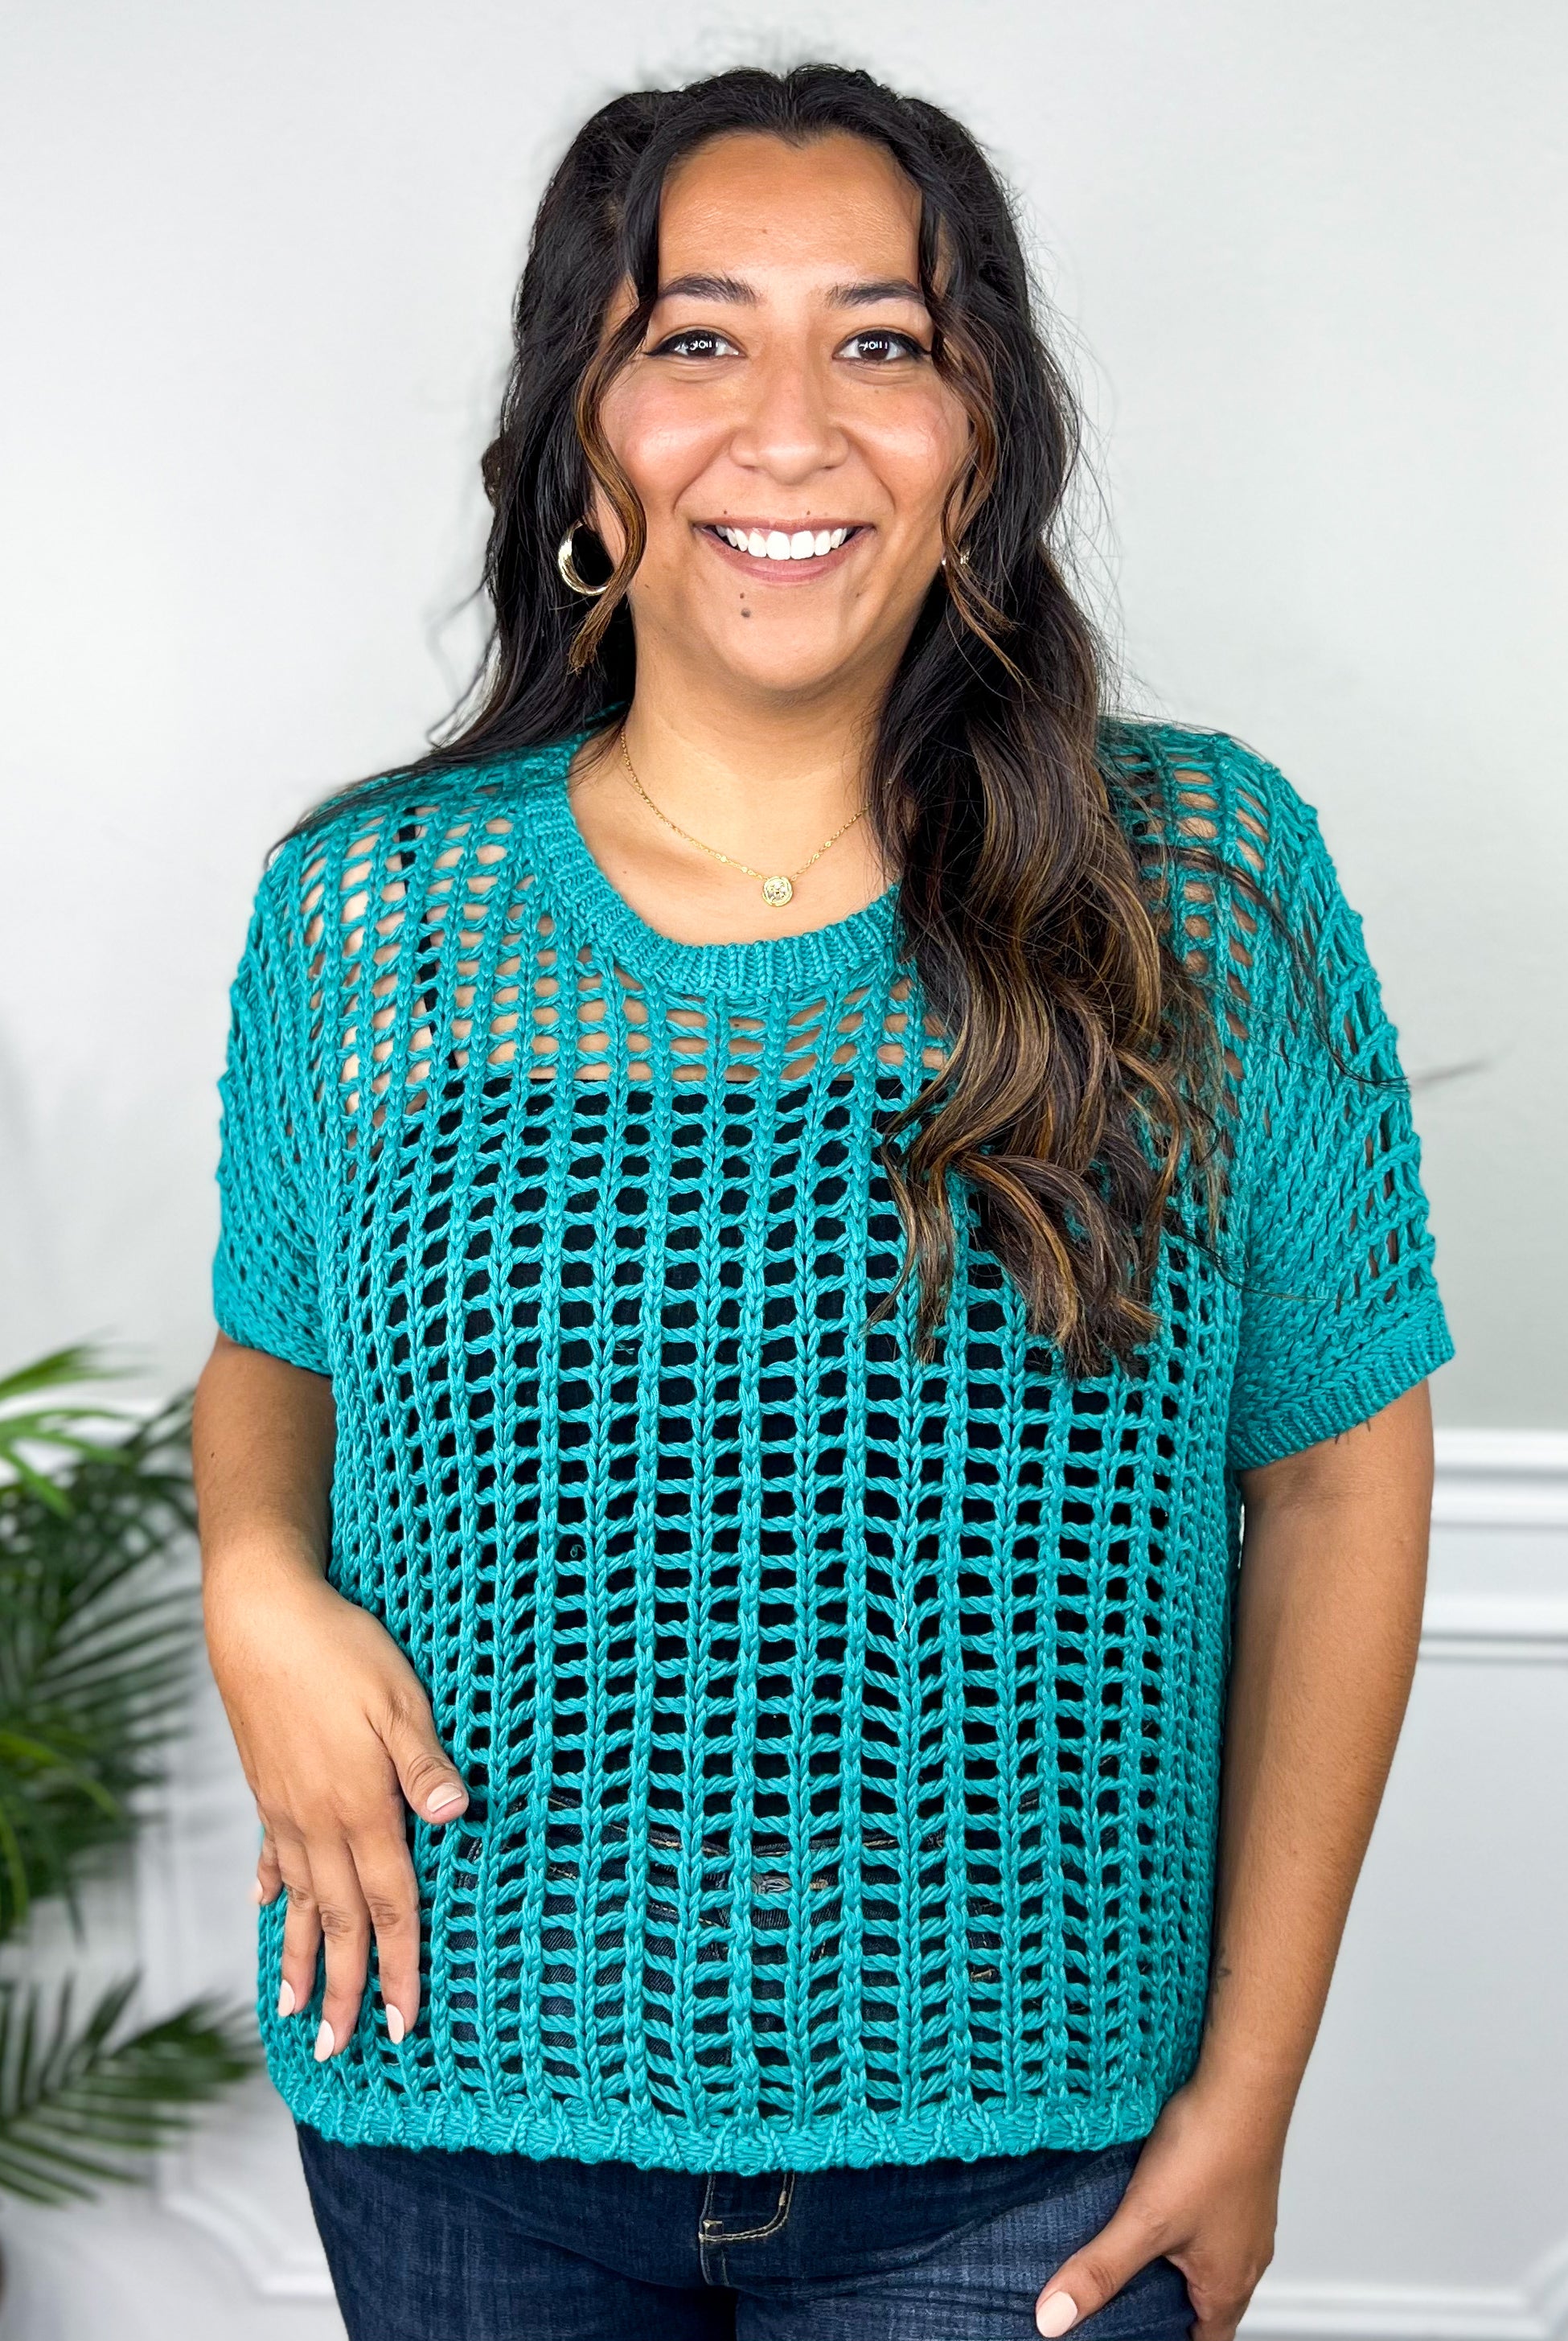 RESTOCK: What a Catch Crochet Top-110 Short Sleeve Top-Bibi-Heathered Boho Boutique, Women's Fashion and Accessories in Palmetto, FL